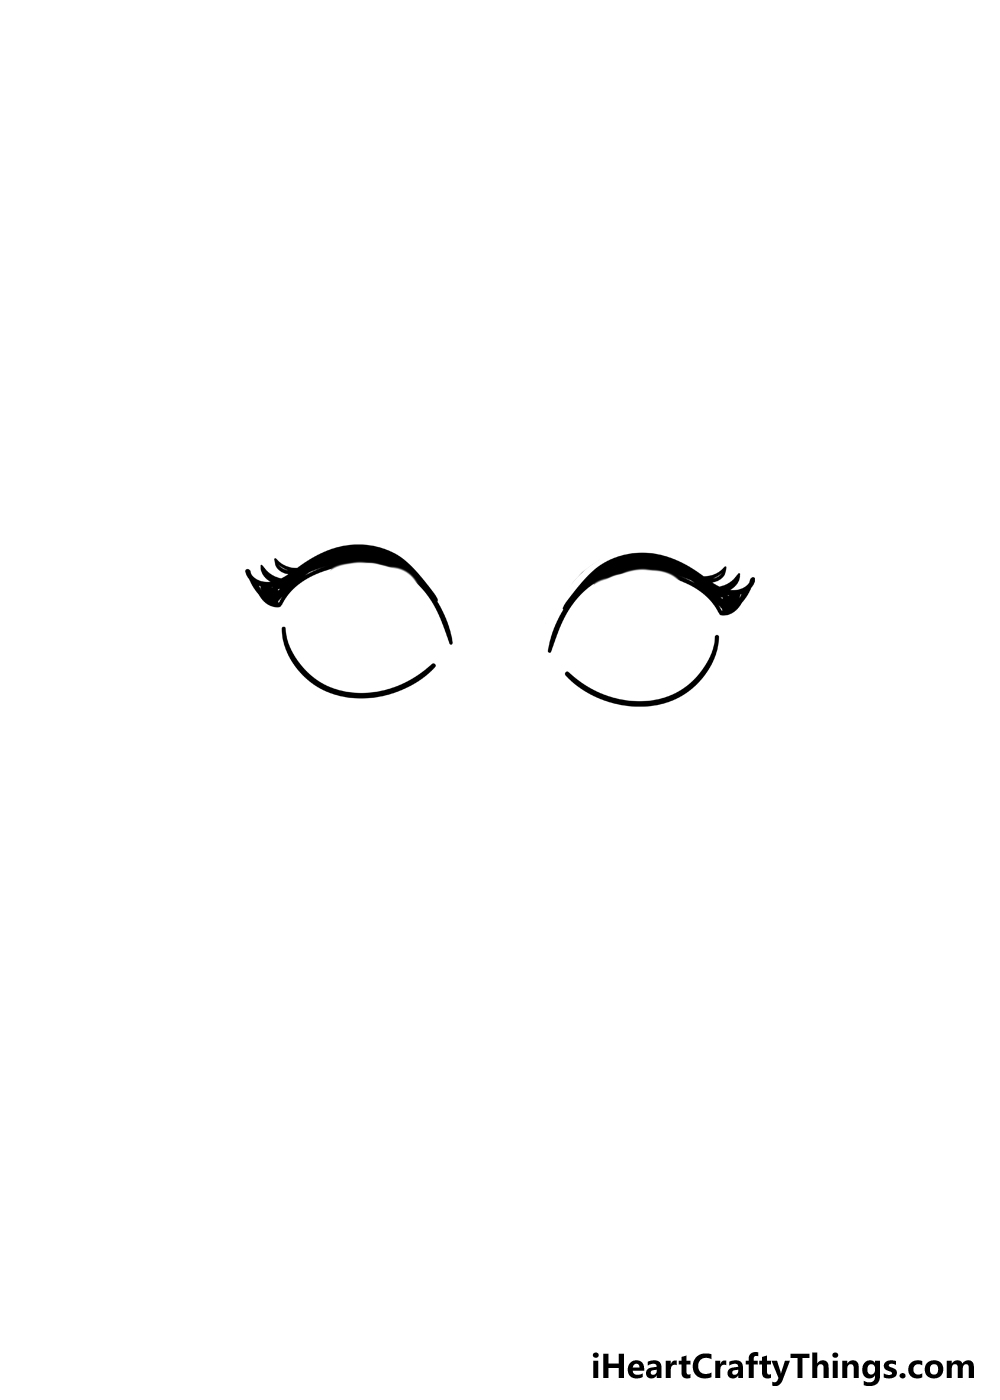 How to Draw Anime Eyes step 3